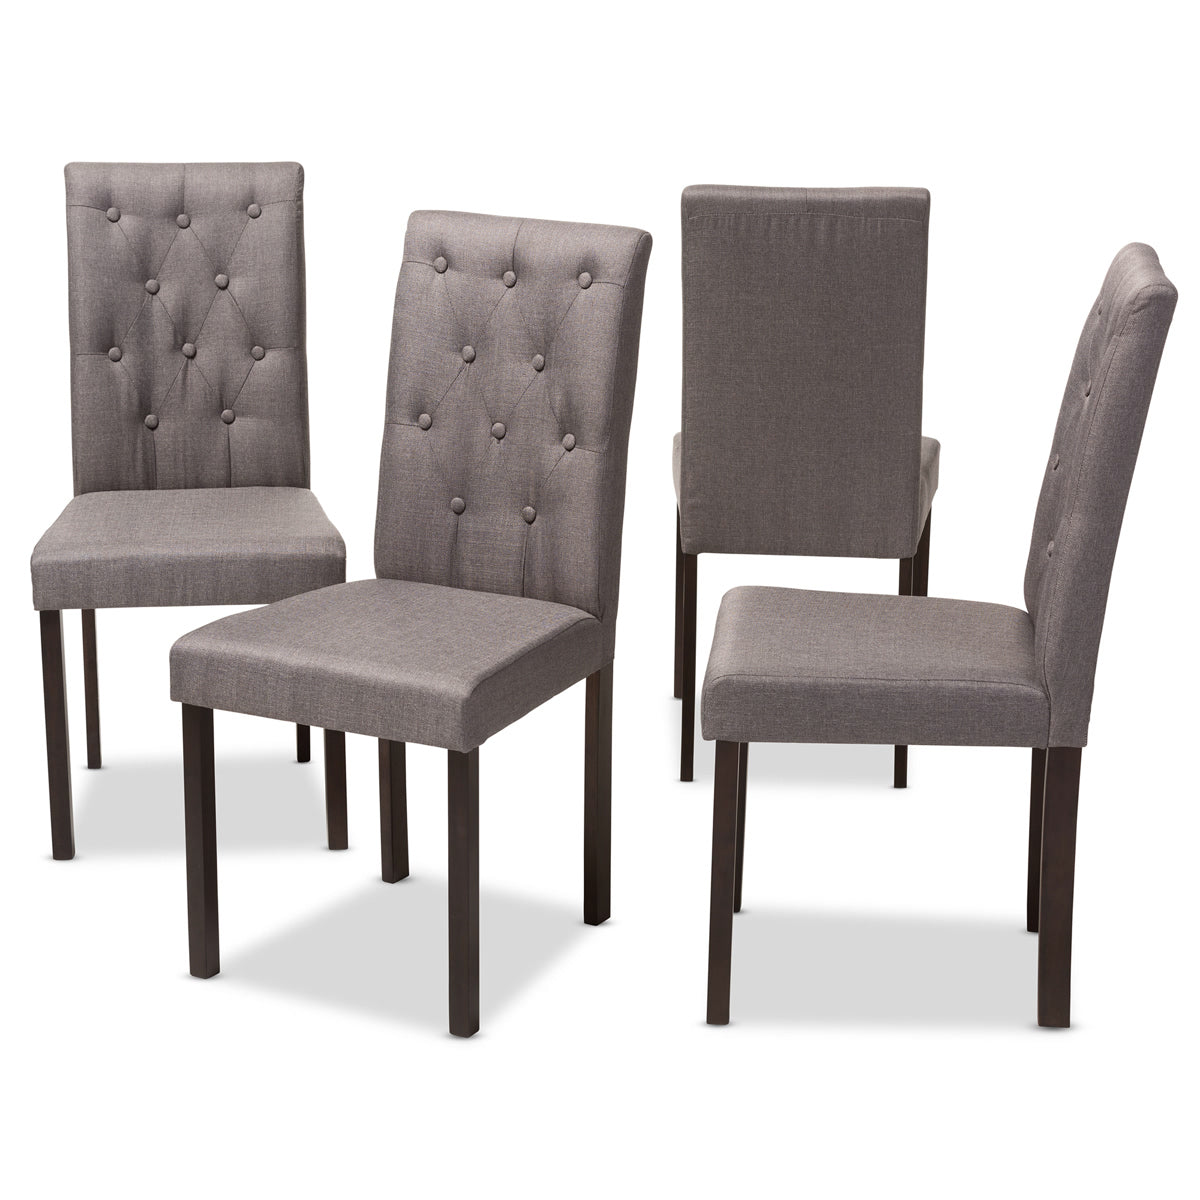 Baxton Studio Gardner Modern and Contemporary Dark Brown Finished Grey Fabric Upholstered Dining Chair (Set of 4) Baxton Studio-dining chair-Minimal And Modern - 3